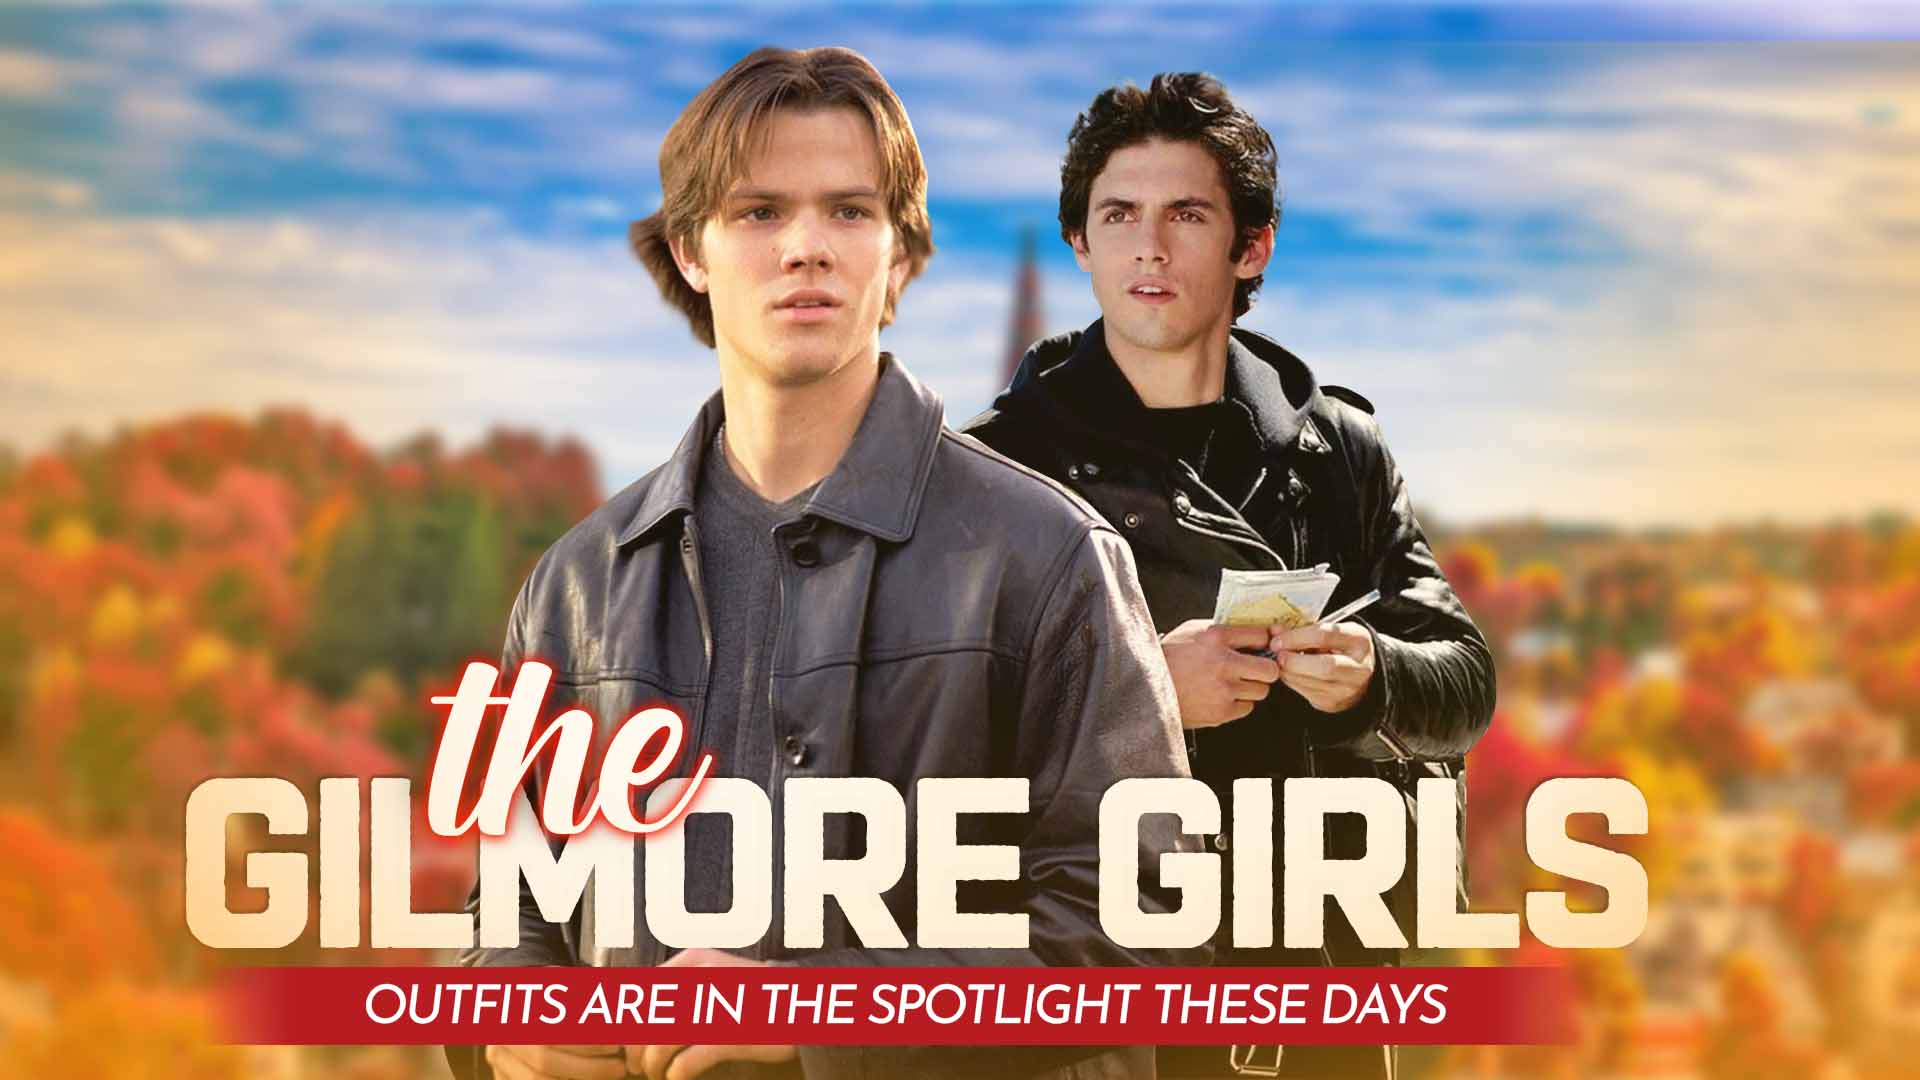 THE GILMORE GIRLS OUTFITS ARE IN THE SPOTLIGHT THESE DAYS